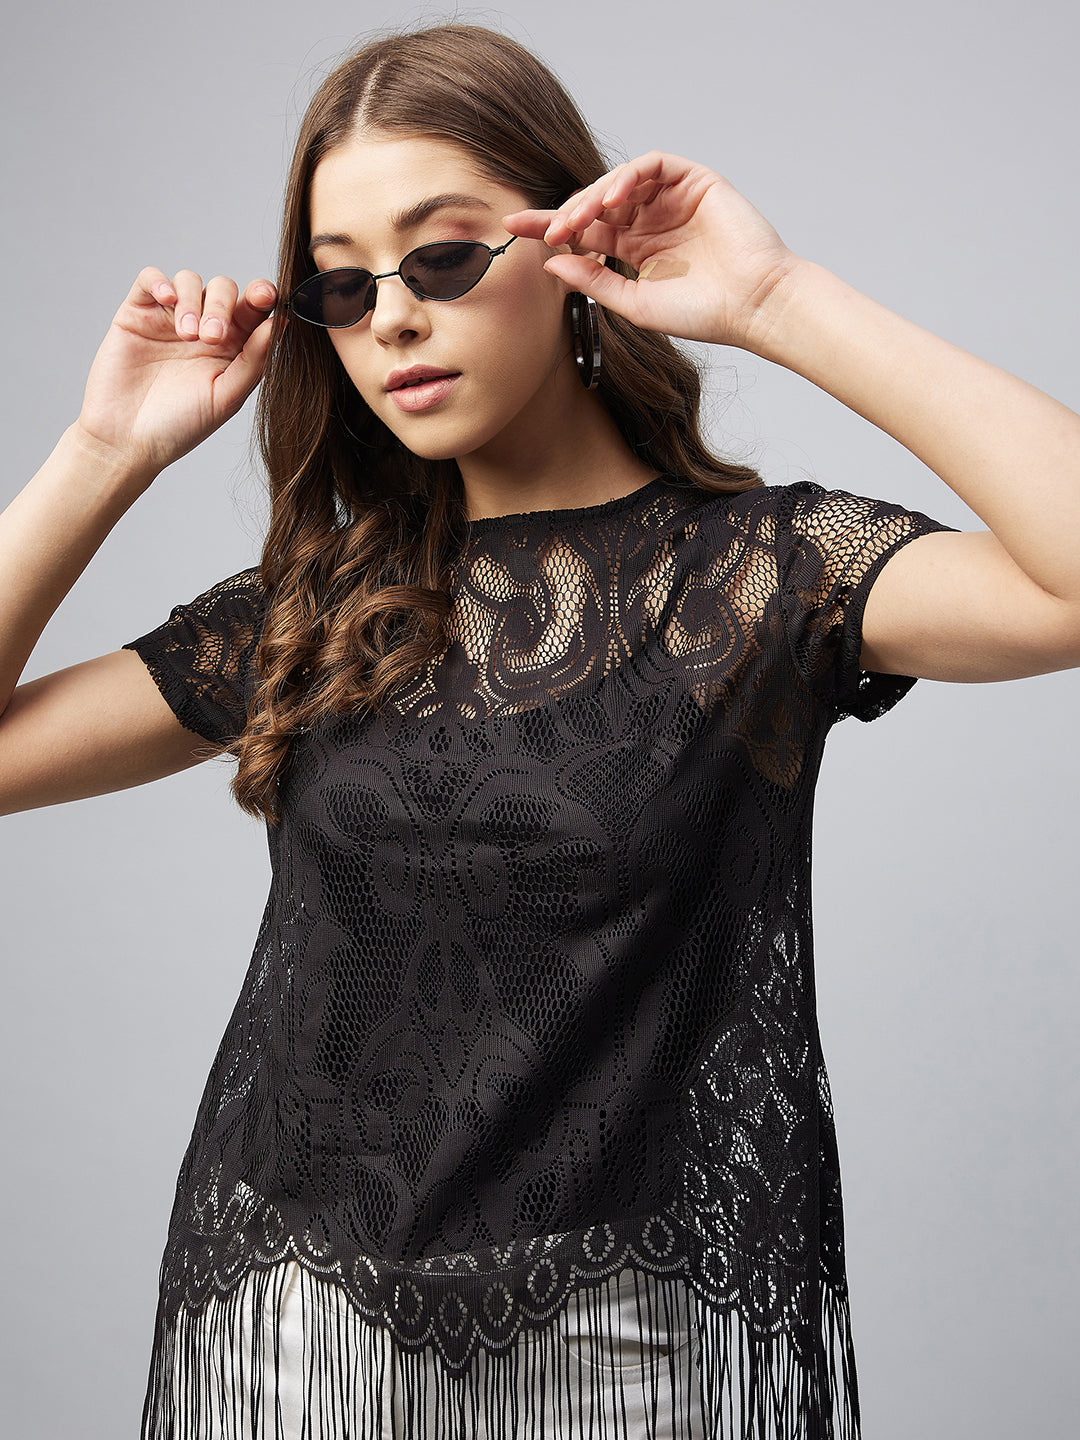 Women's Black Sheer Lace Top with Fringes (Inner not provided)